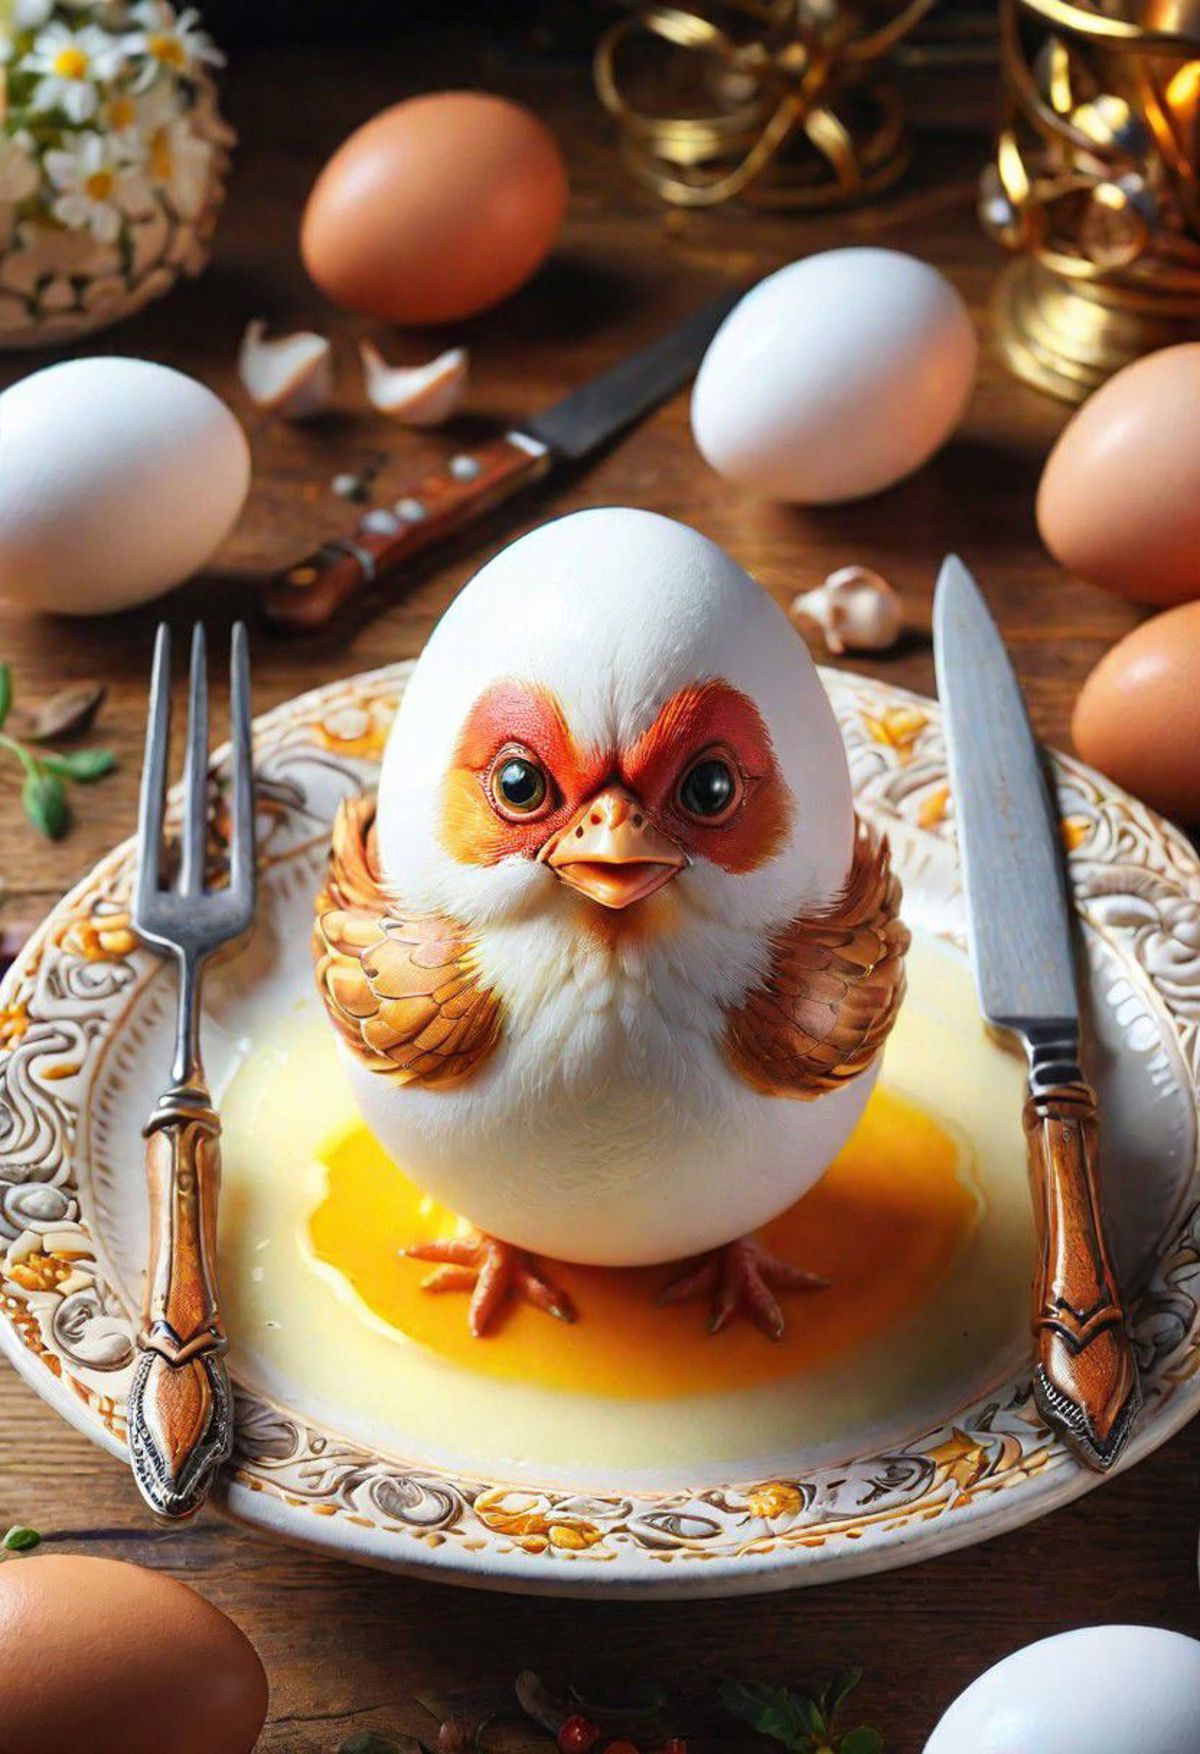 Decorative Egg with Eyes and Chicken Wings on a Plate with a Fork and Knife